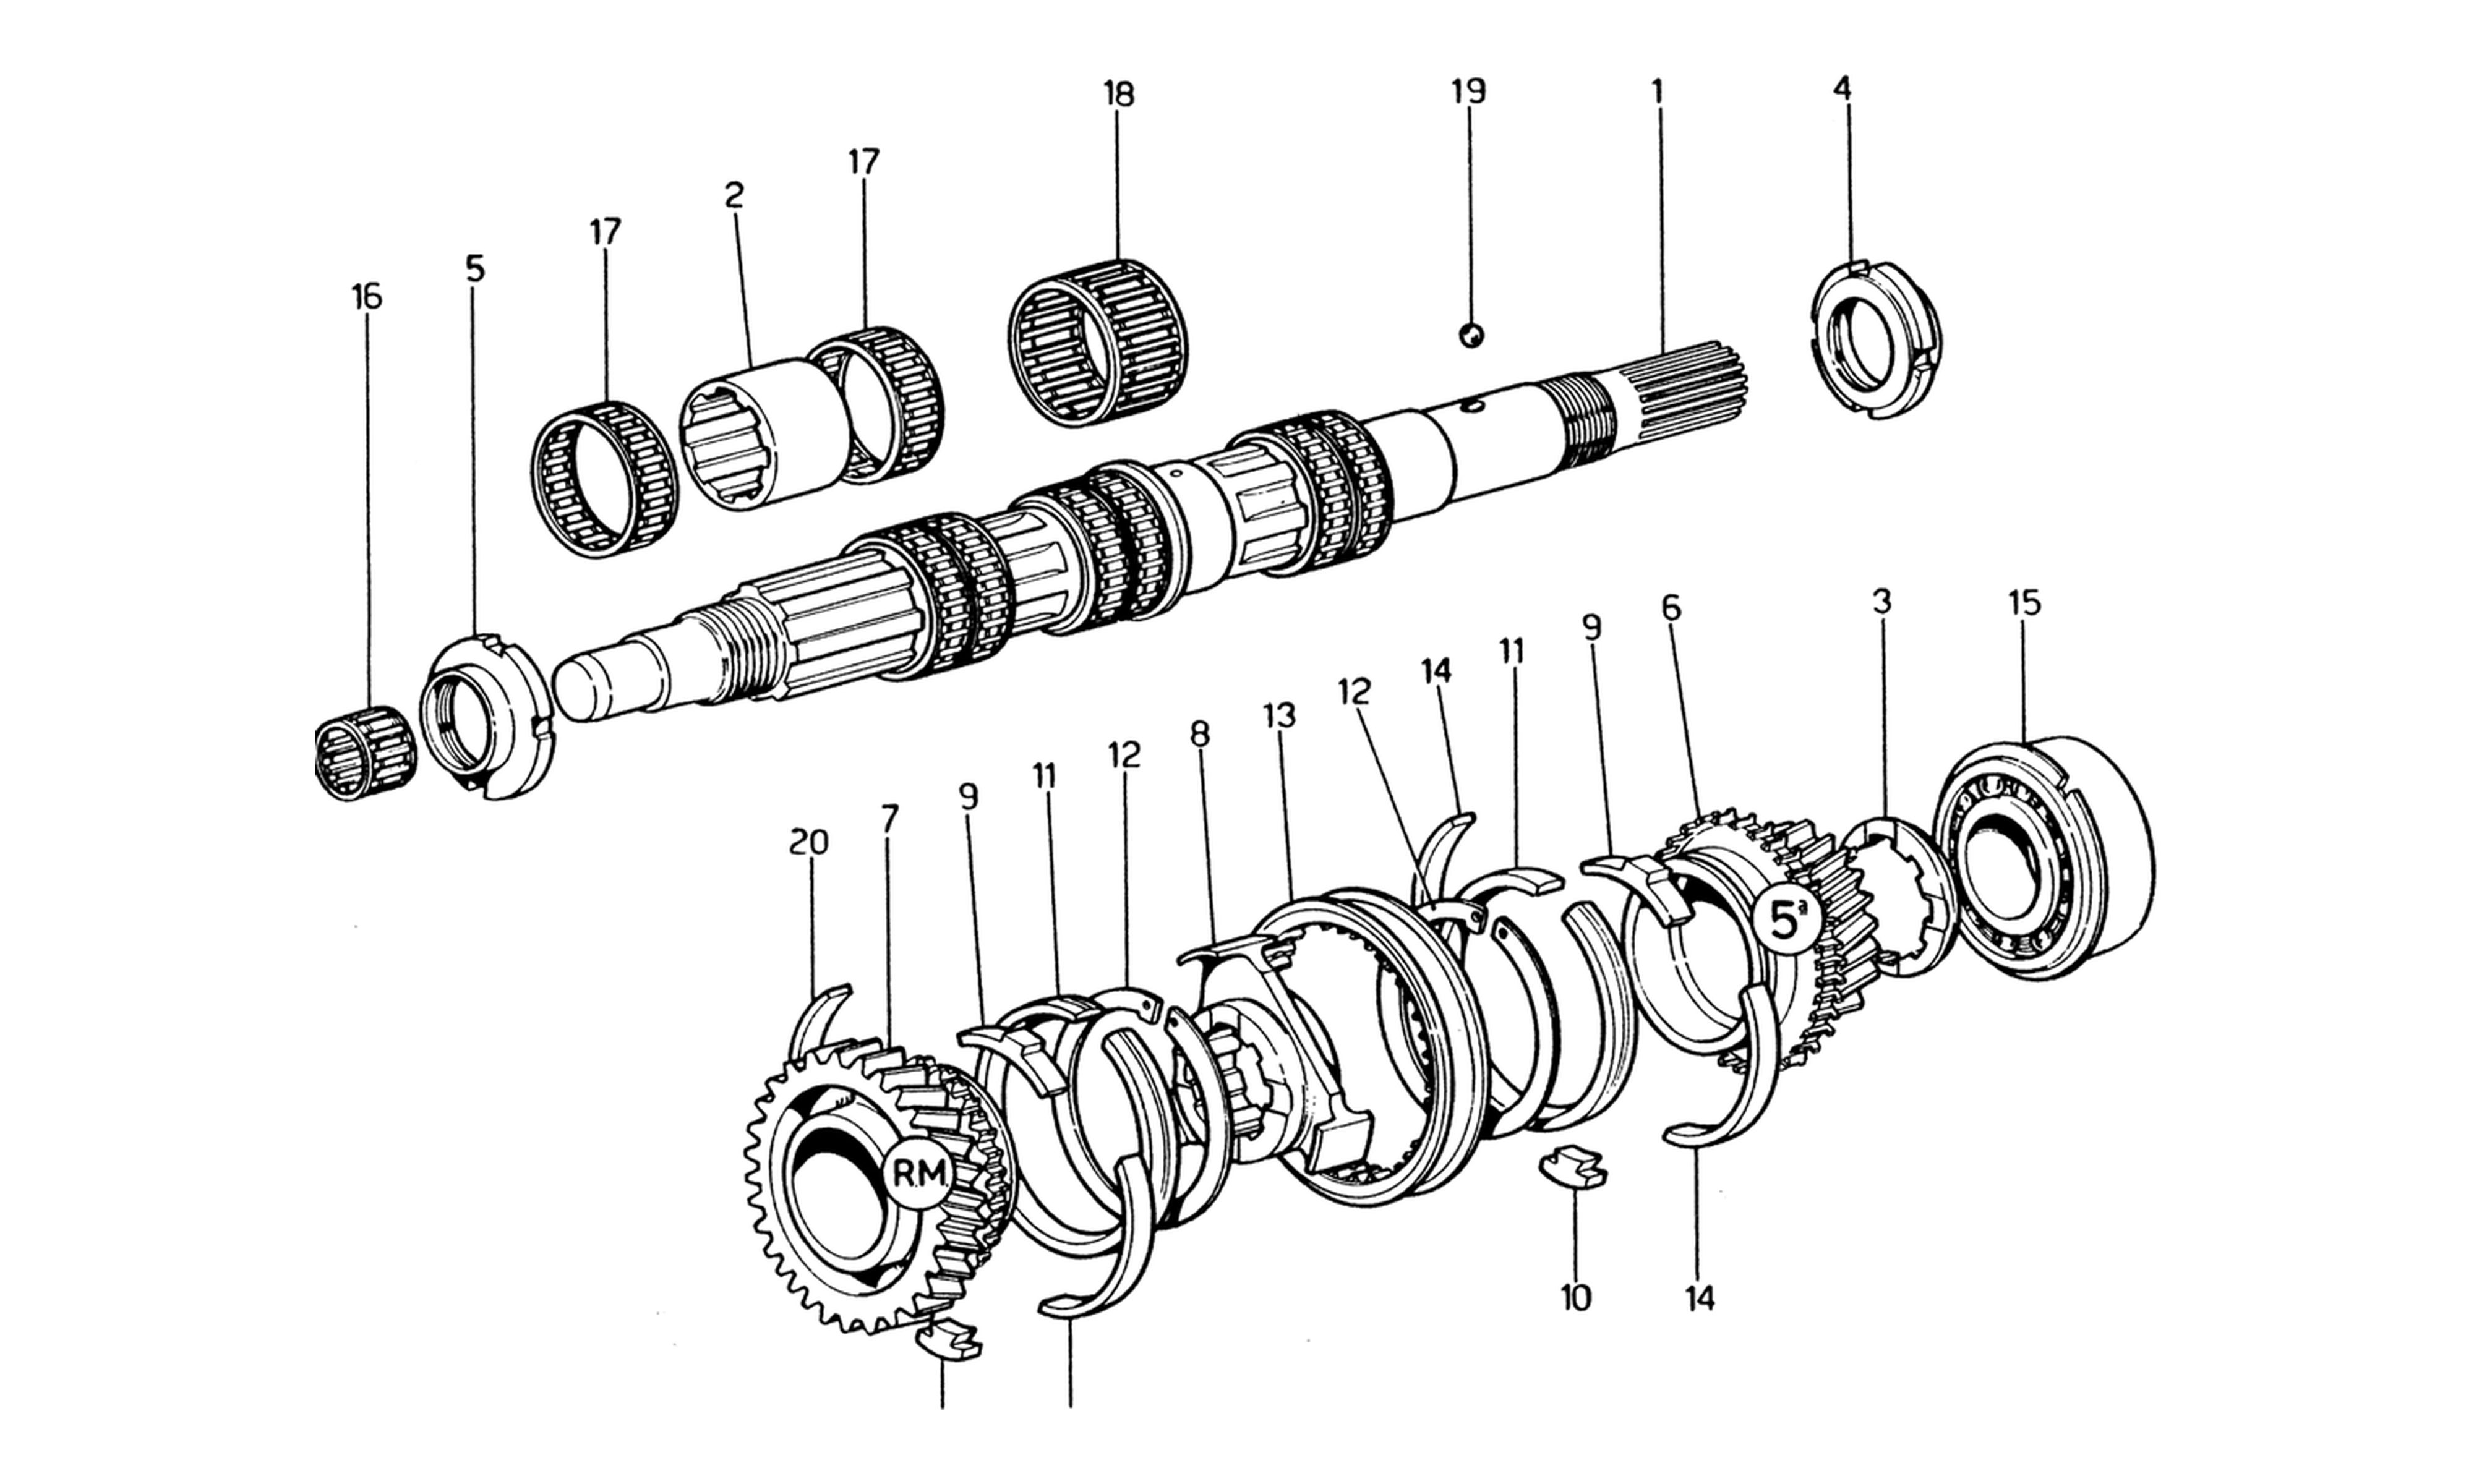 Schematic: Lay Shaft Gears (Rear End)